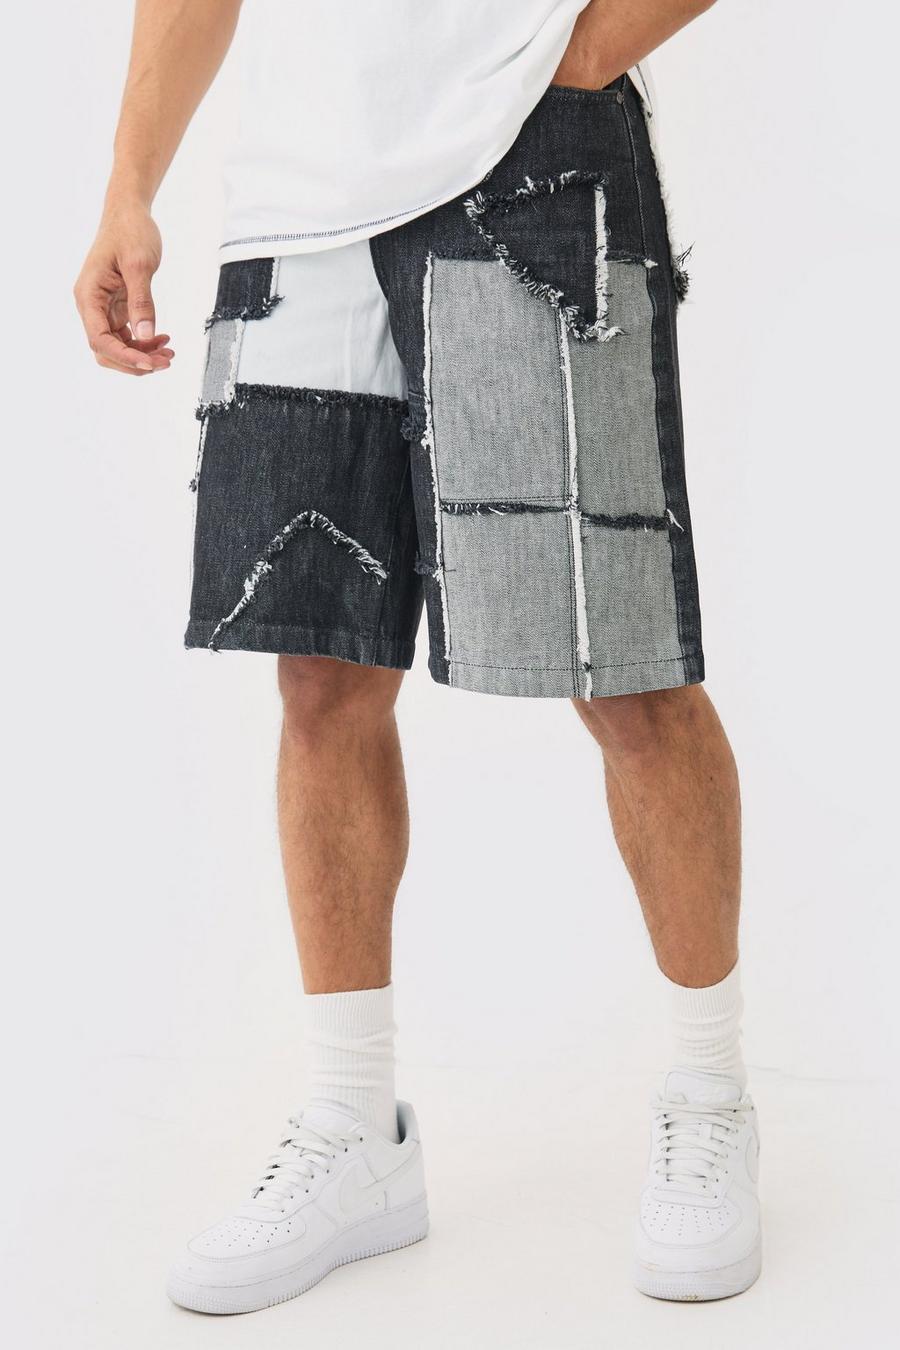 Zerrissene Patchwork Jeansshorts in Grau, Charcoal image number 1